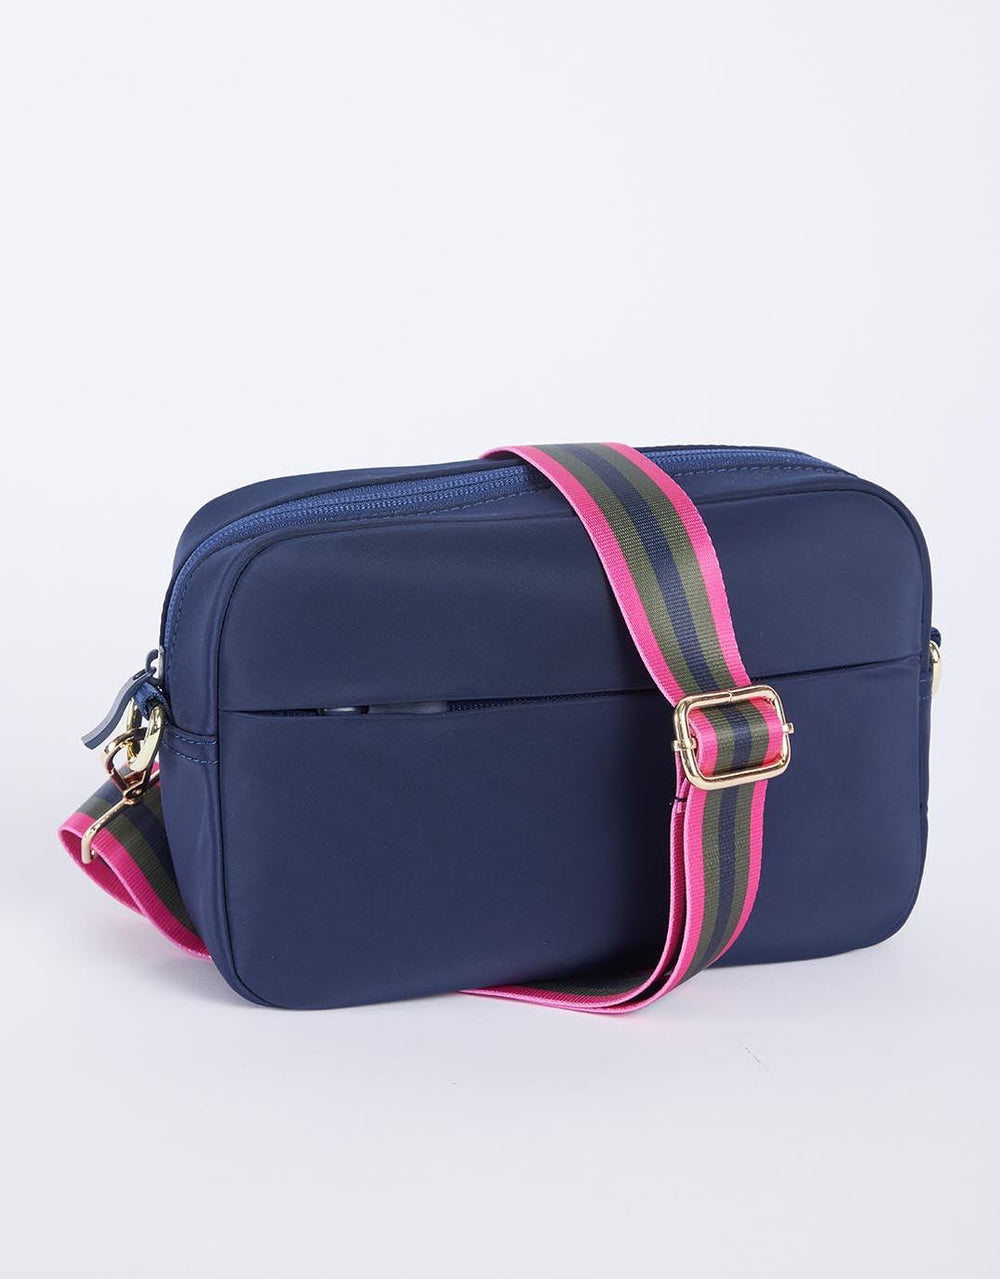 White & Co. - Off-Duty Crossbody Bag - Navy with Khaki/Hot Pink Stripe - White & Co Living Accessories